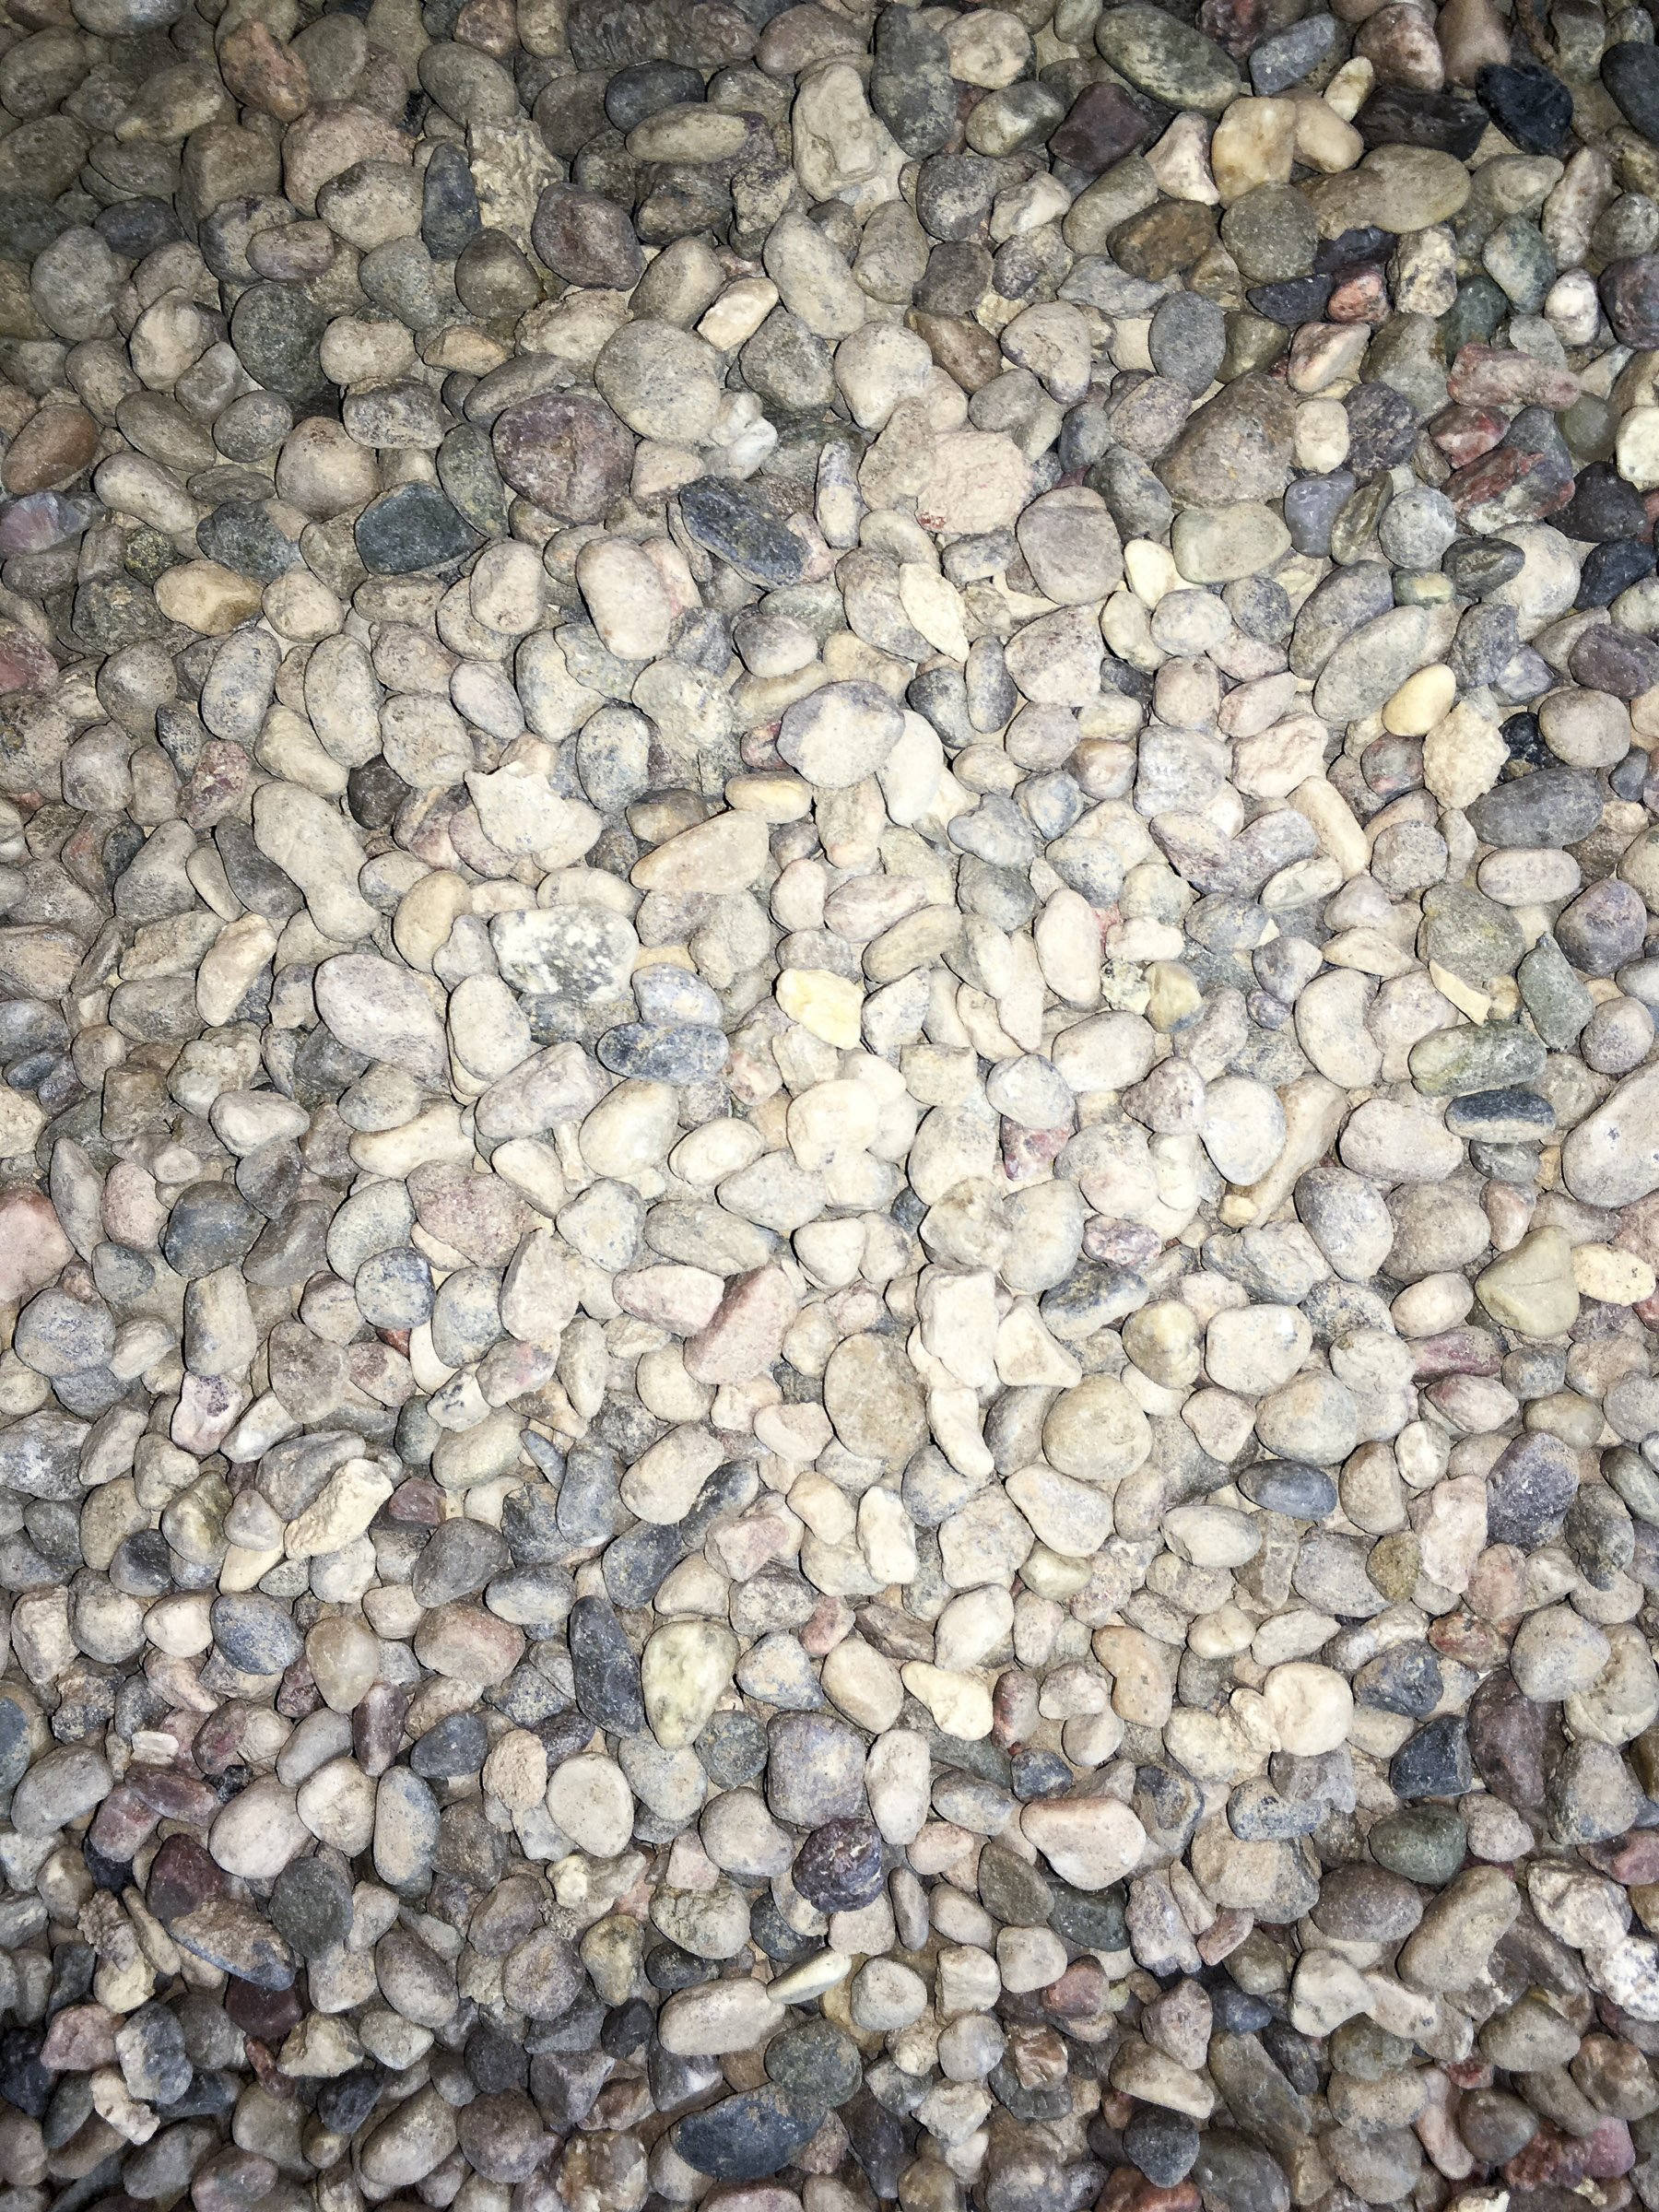 Gravel | Crusher Fines and Ground Cover Rock for your Xeriscape